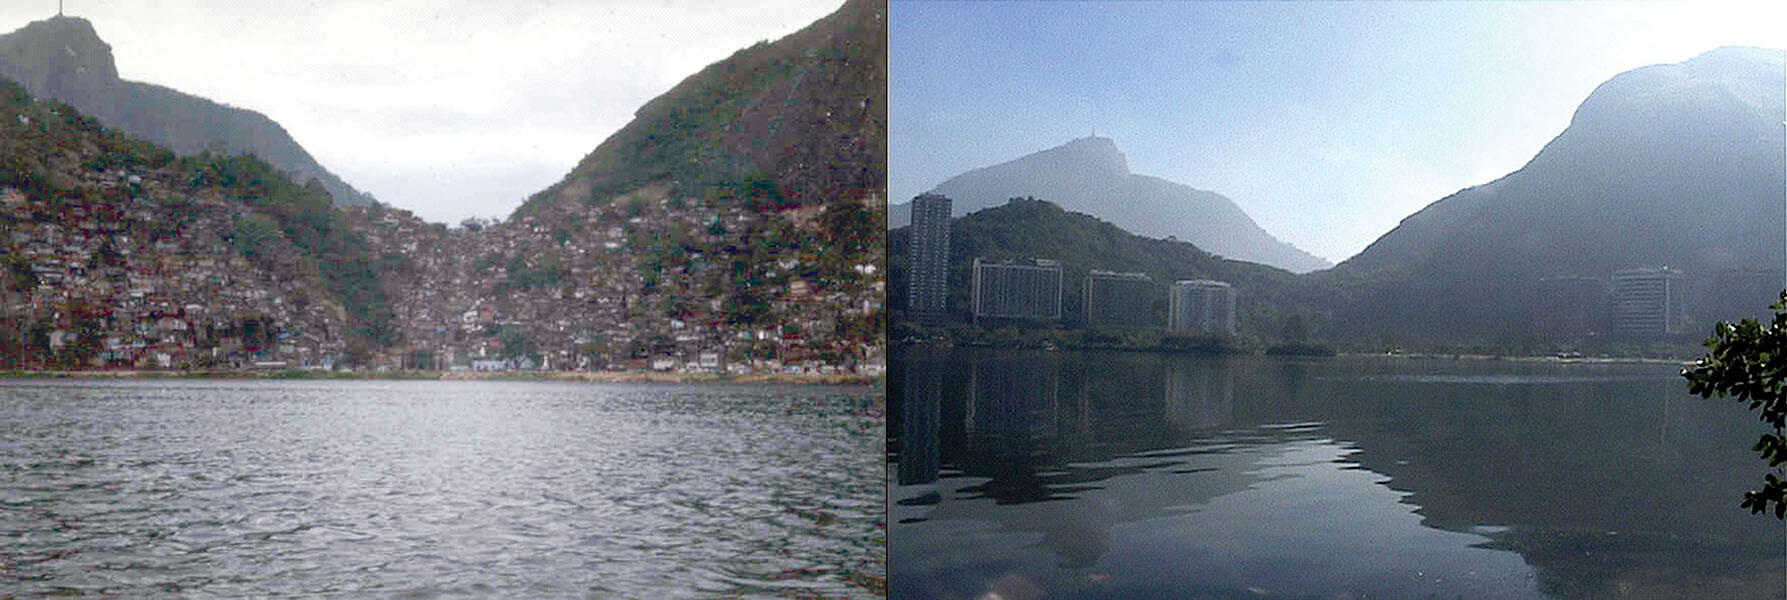 A shot of Catacumba in 1969 (left), and the site in the 1990s, after the favela's "disappearance"/forced removal. (Photos courtesy of Janice Perlman.)